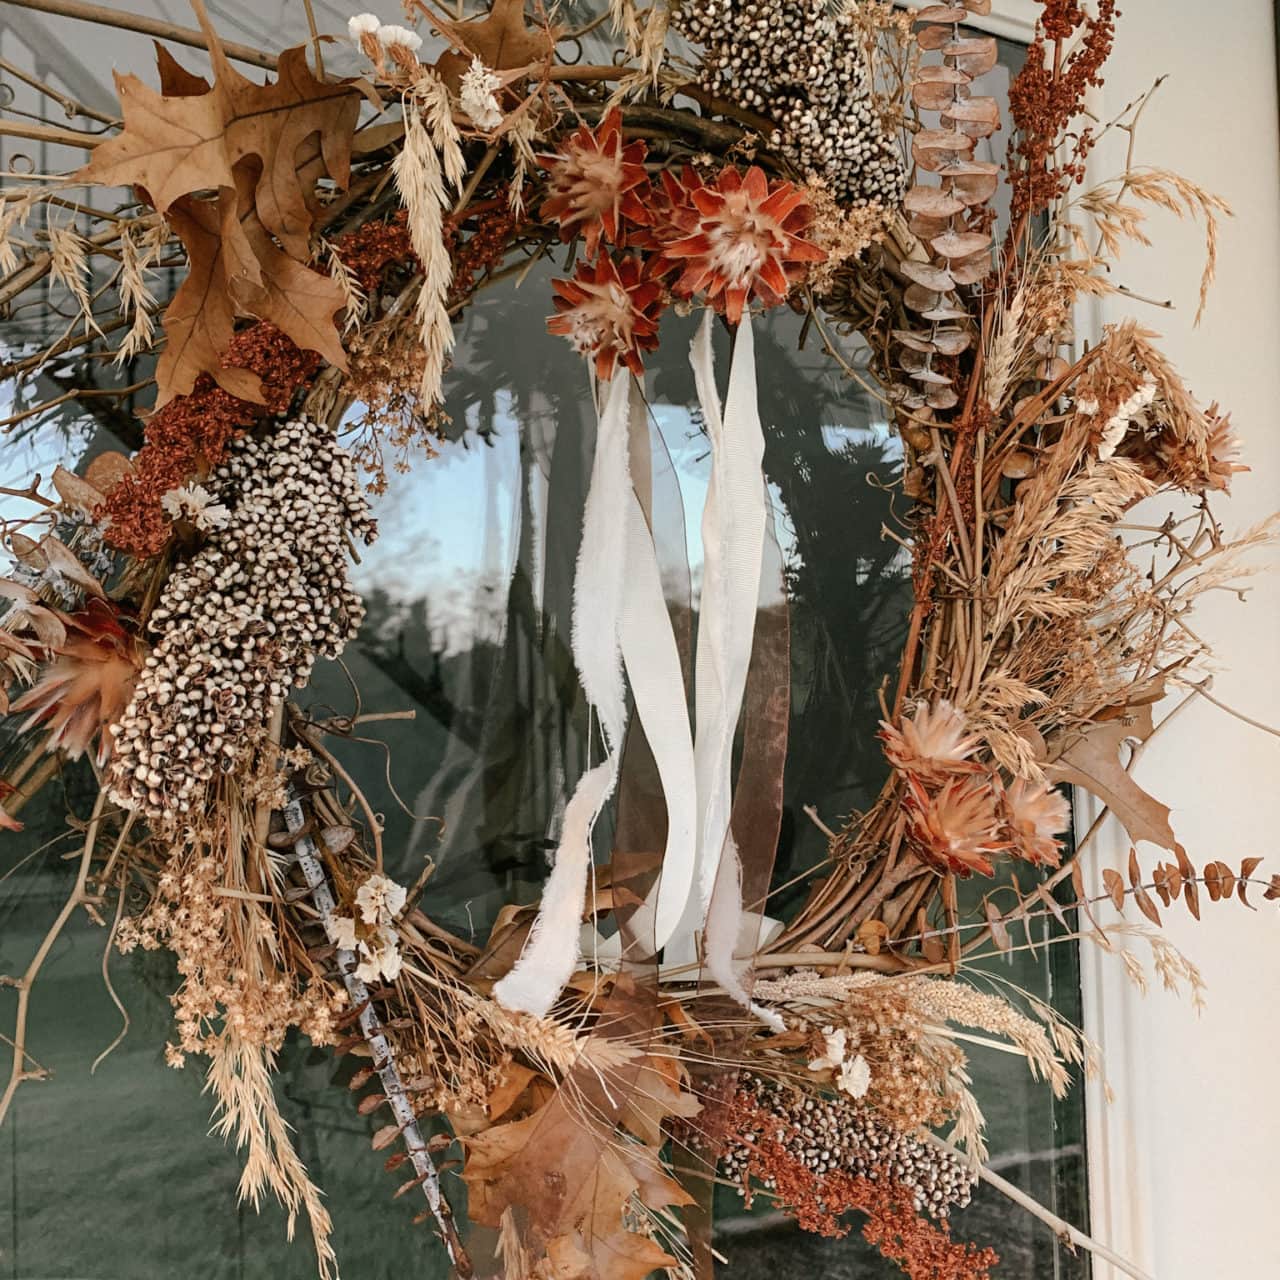 Dried Floral Wreath Used as Easy and Affordable Fall Decor